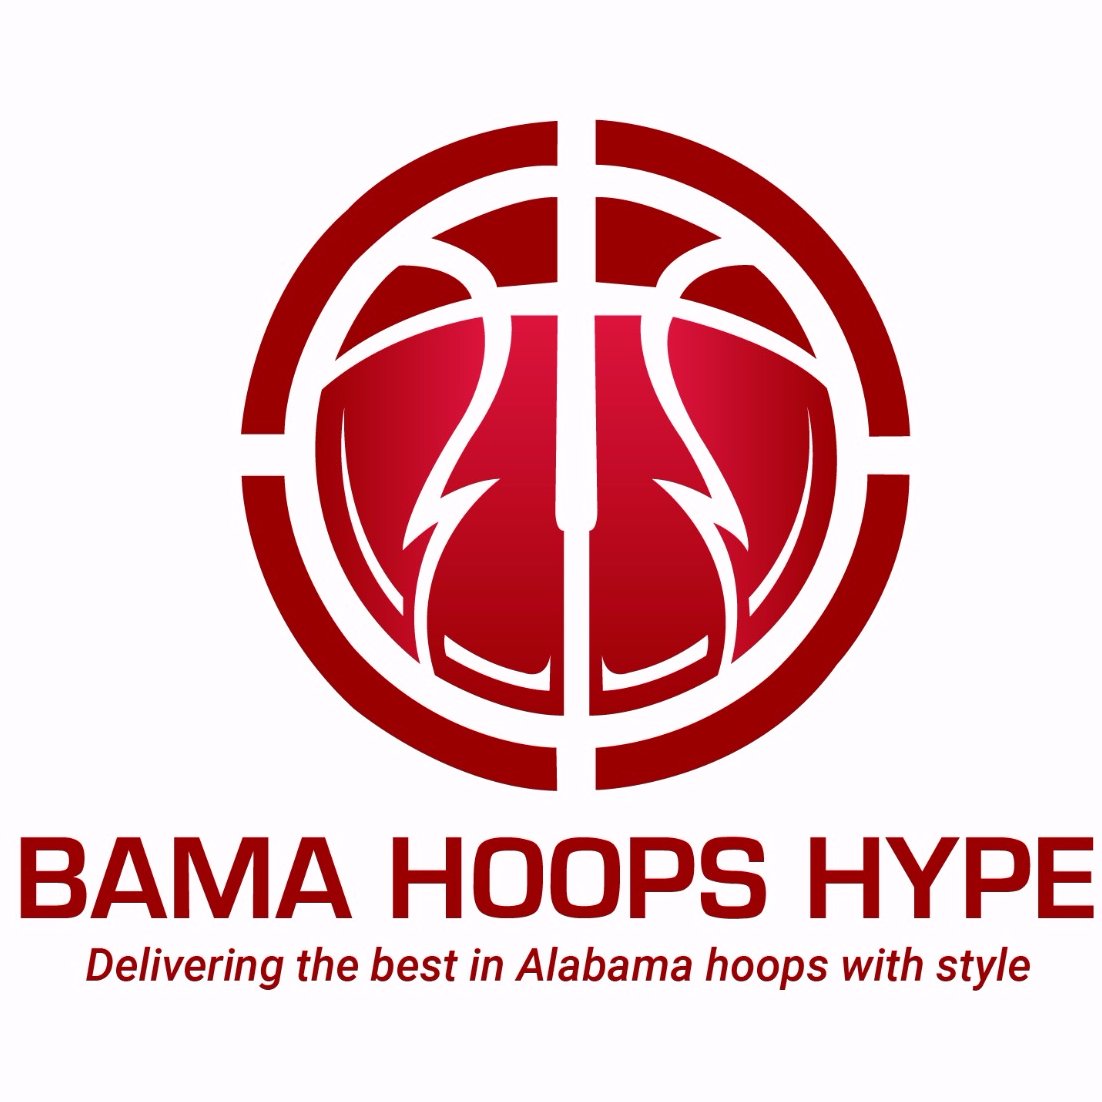 Seeking to deliver the best coverage of Alabama men’s basketball. If you like stats, quotes and graphics, you’ll like us.